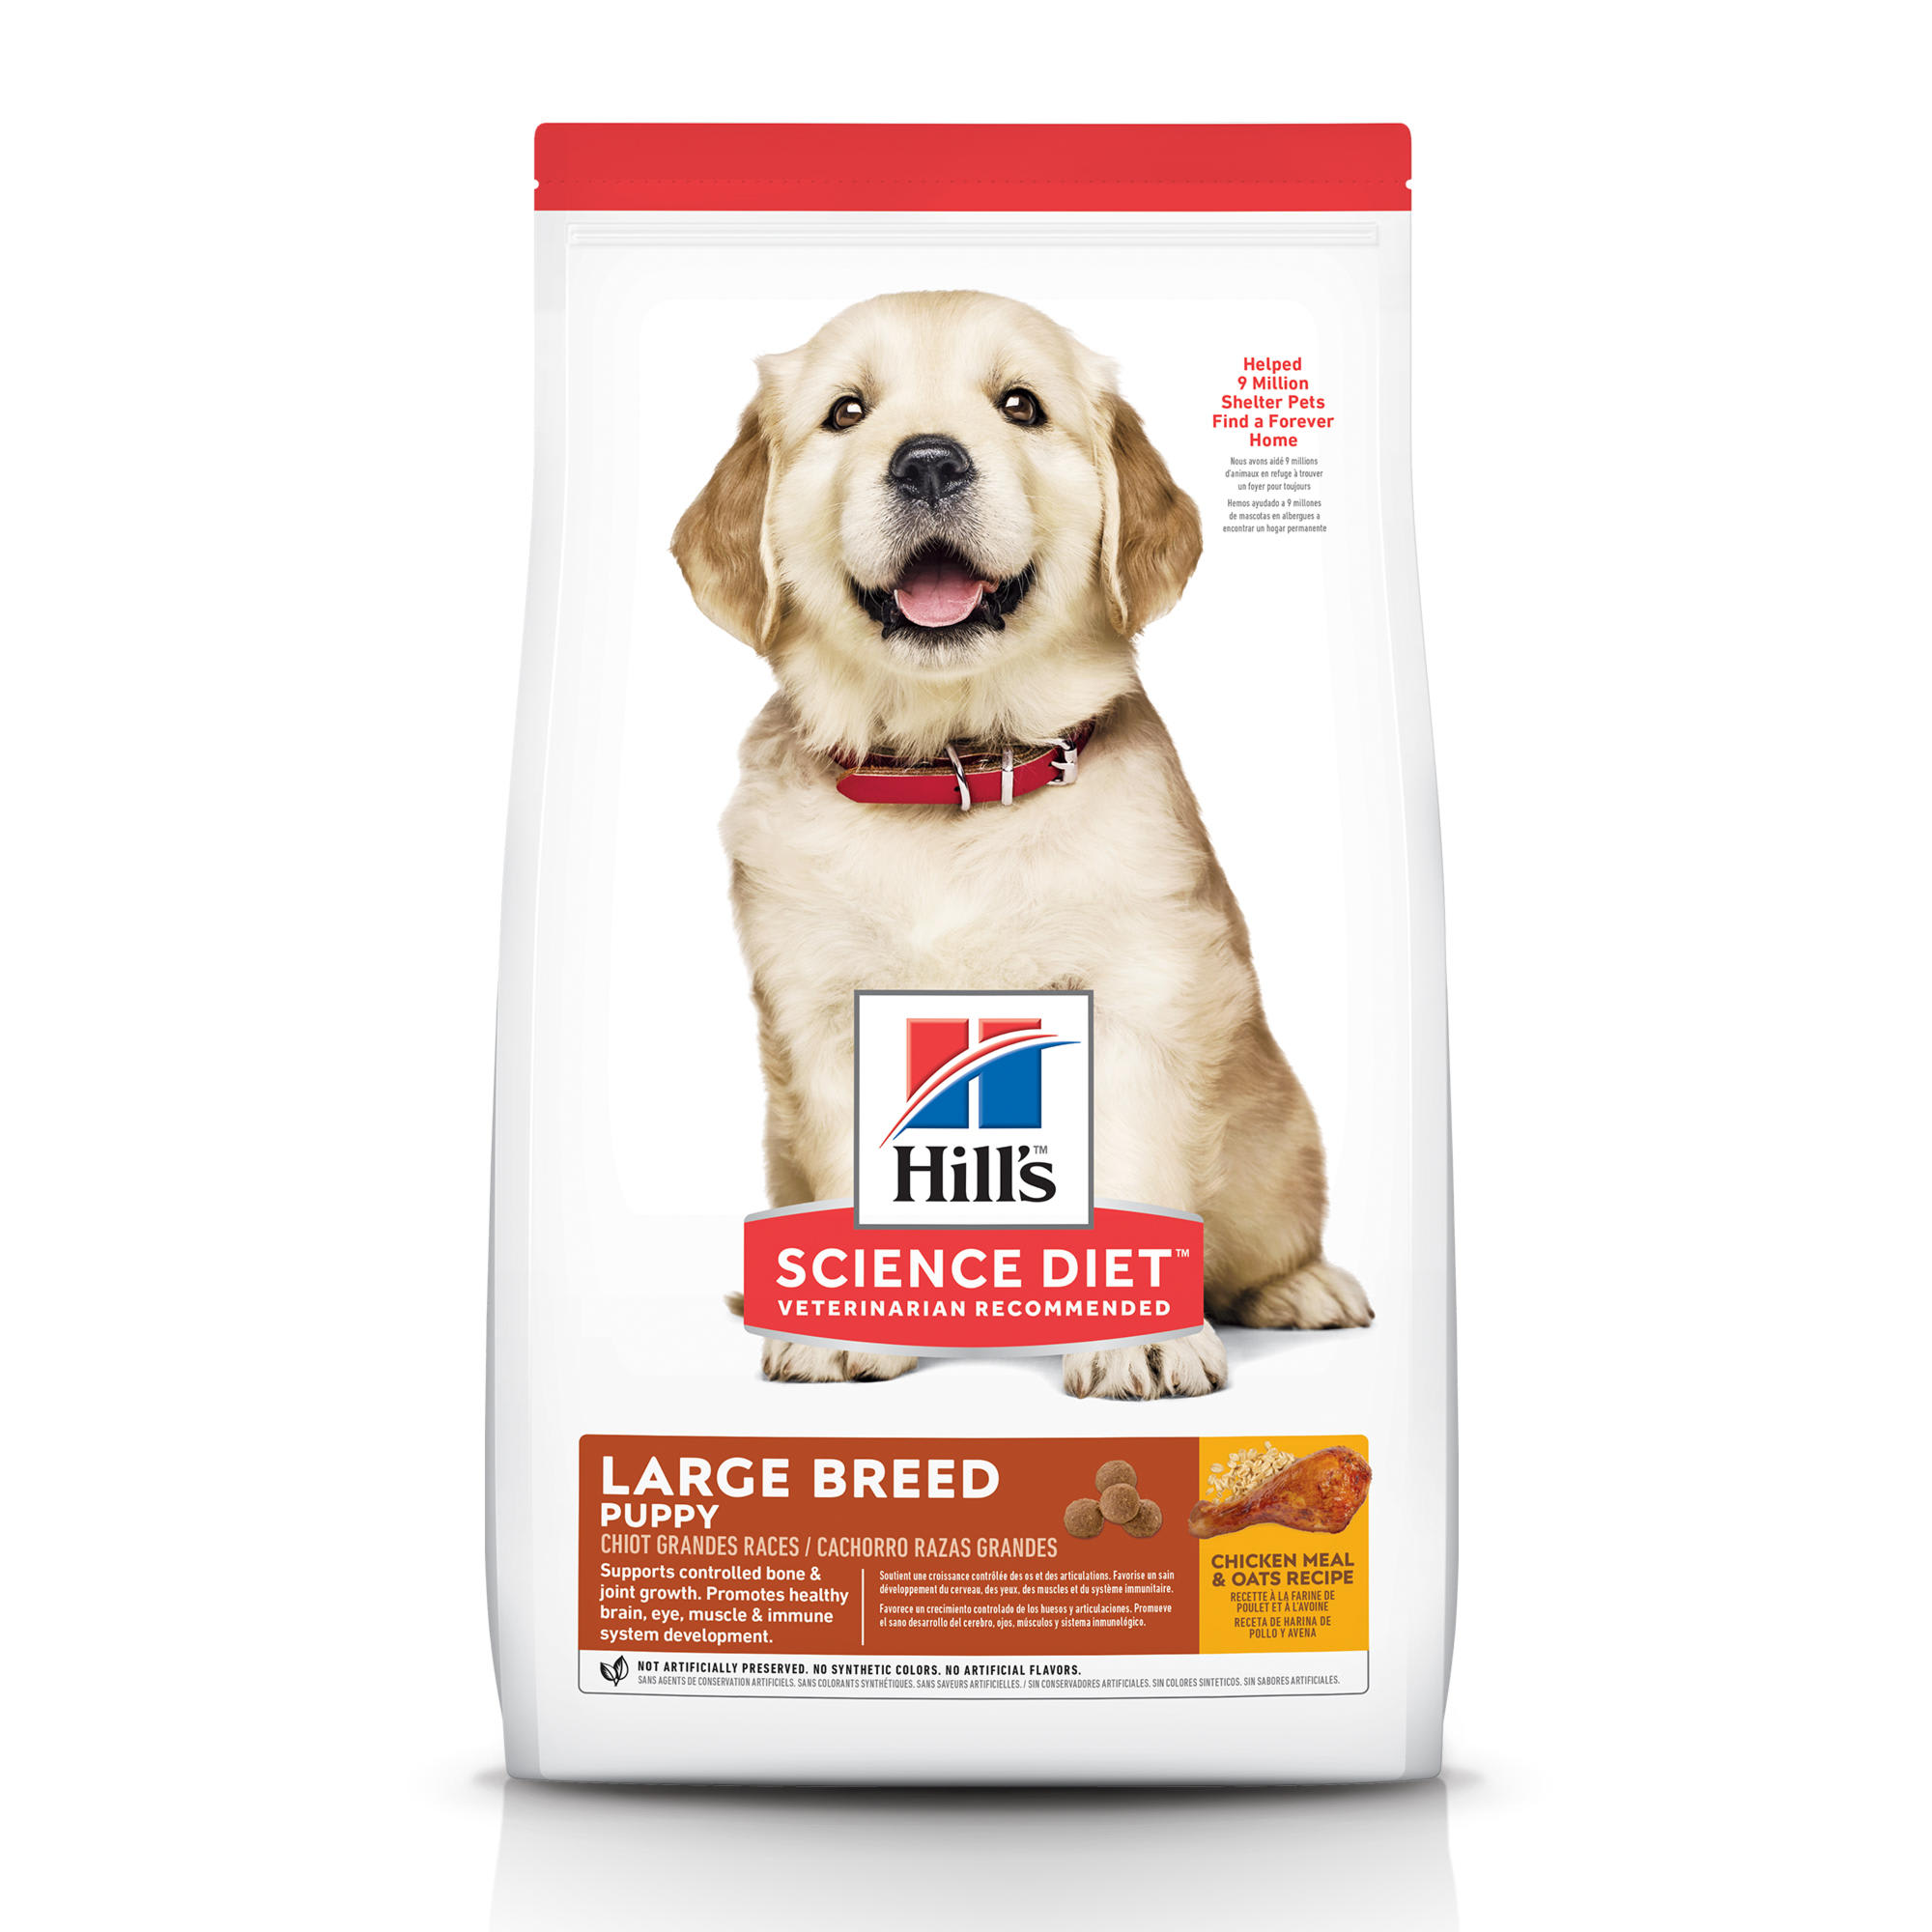 Hill's Science Diet Large Breed Chicken Meal & Oats Recipe Dry Puppy Food, 30 lbs., Bag | Petco